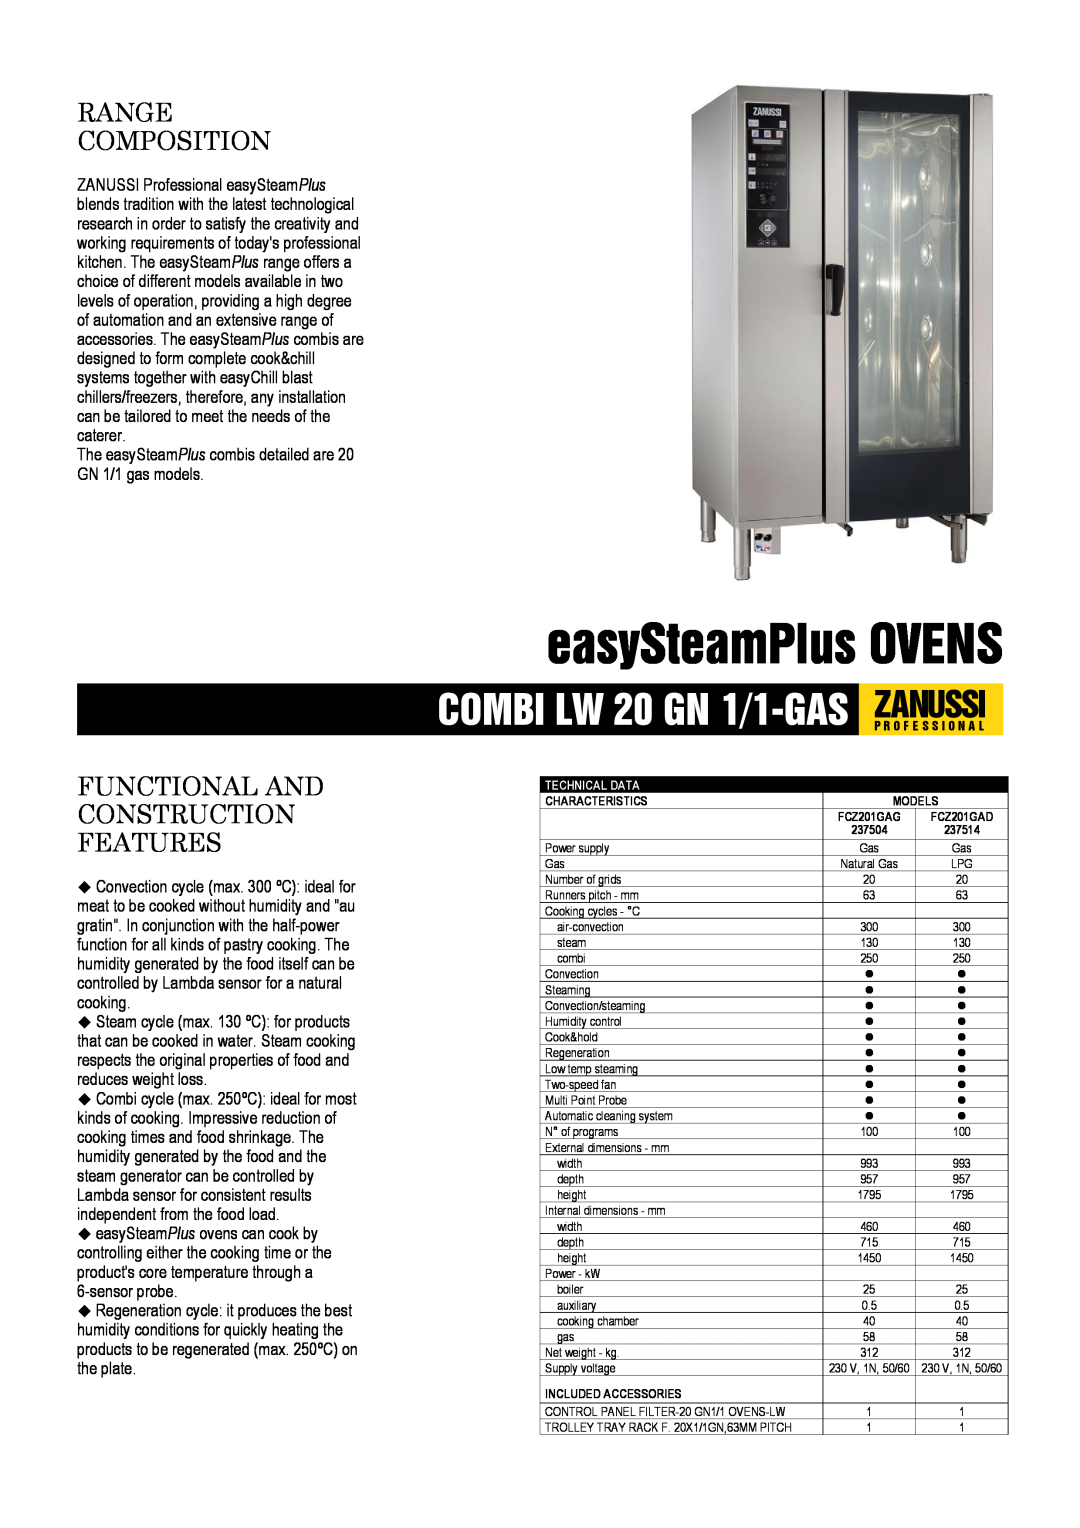 Zanussi FCZ201GAG, FCZ201GAD dimensions easySteamPlus OVENS, Range Composition, Functional And Construction Features 